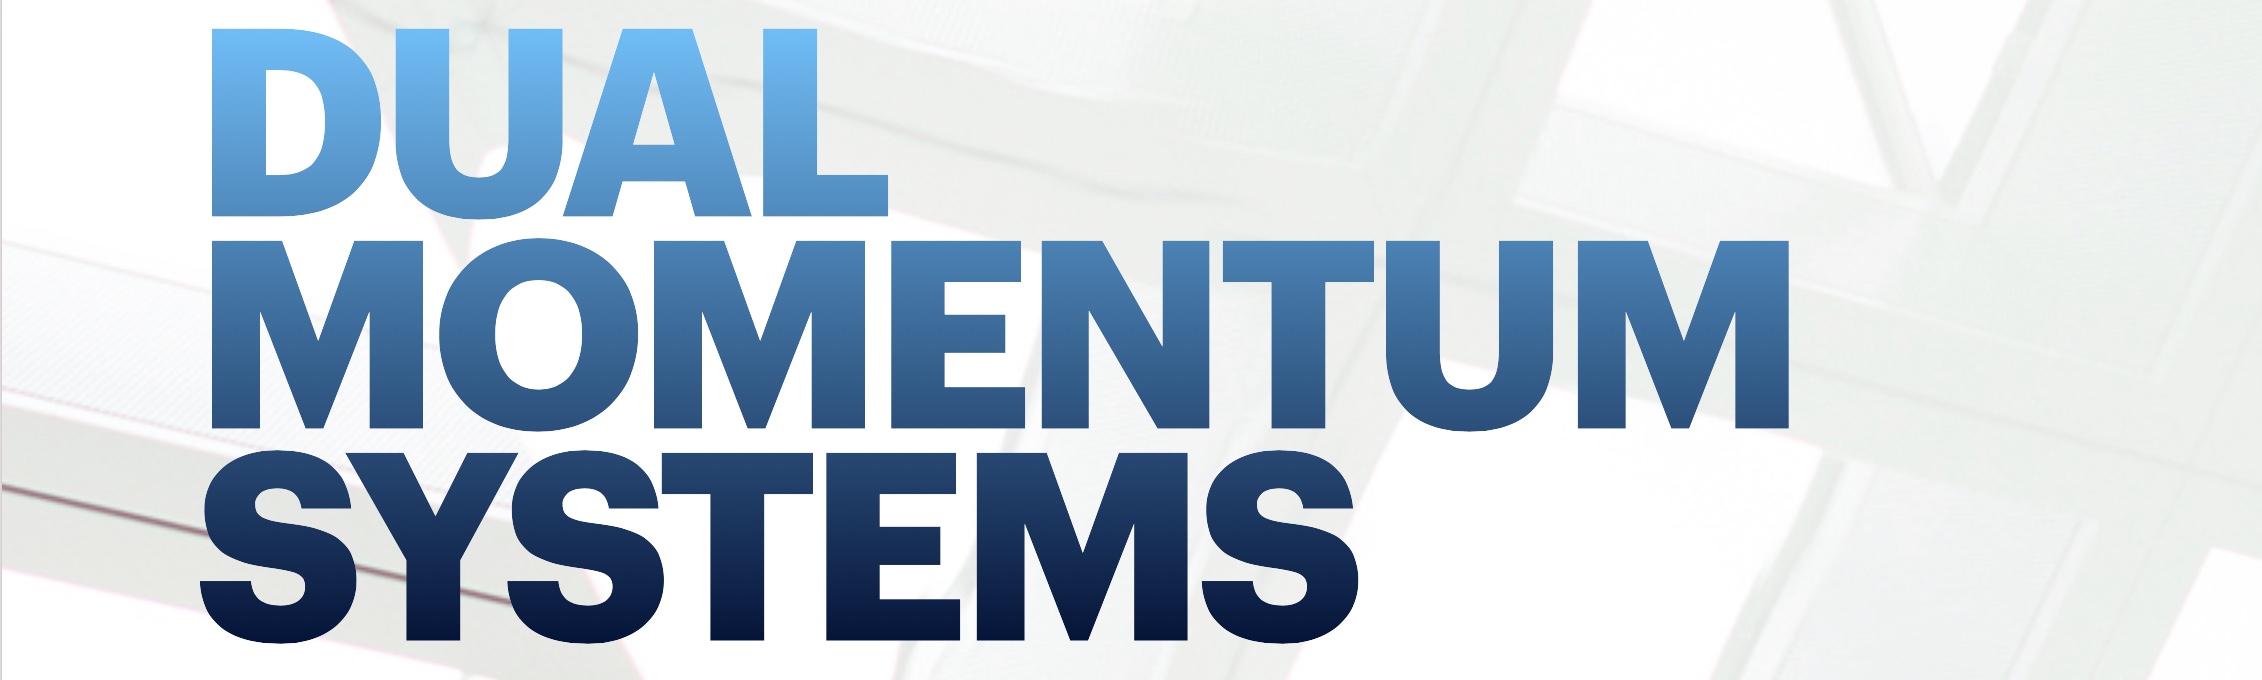 Dual Momentum Systems, process driven investing